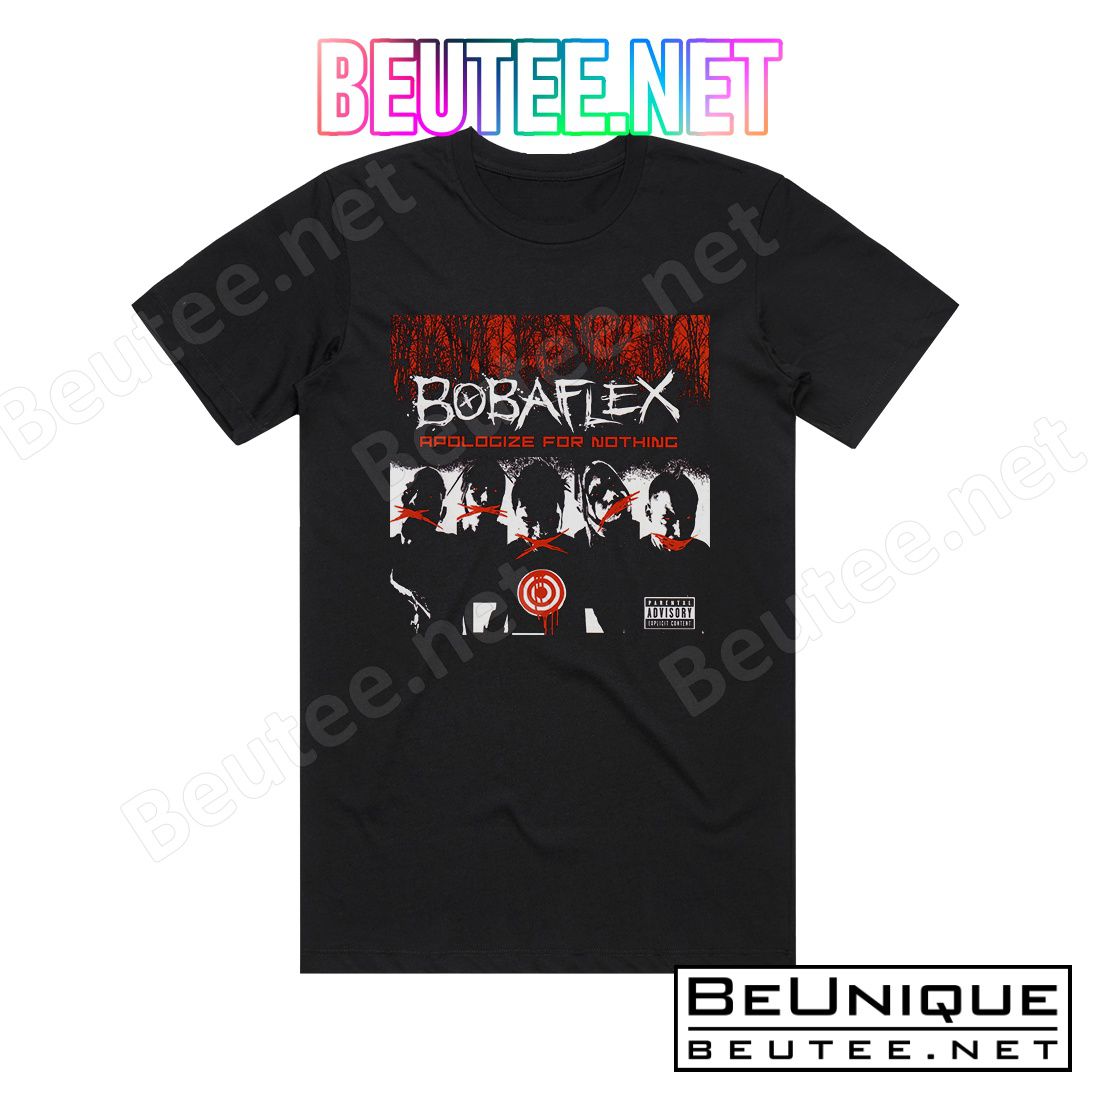 Bobaflex Apologize For Nothing Album Cover T-Shirt